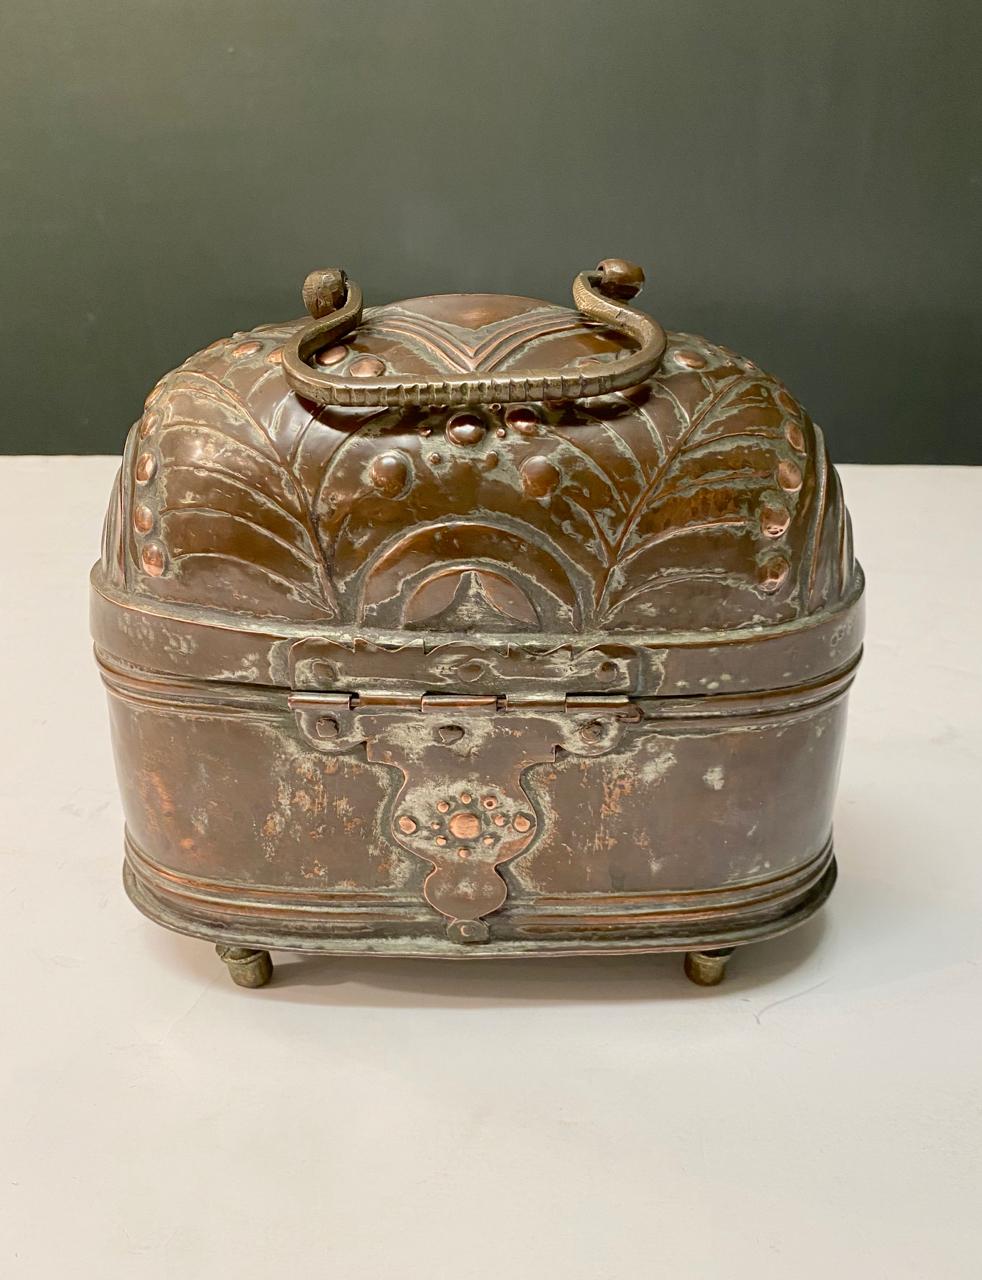 This is a very decorative Dutch Repouse foot warmer that most probably dates to the late 18th or early 19th century. The warmer is in overall good condition, but showing deep natural acquired over many years of use. This would make great decorative